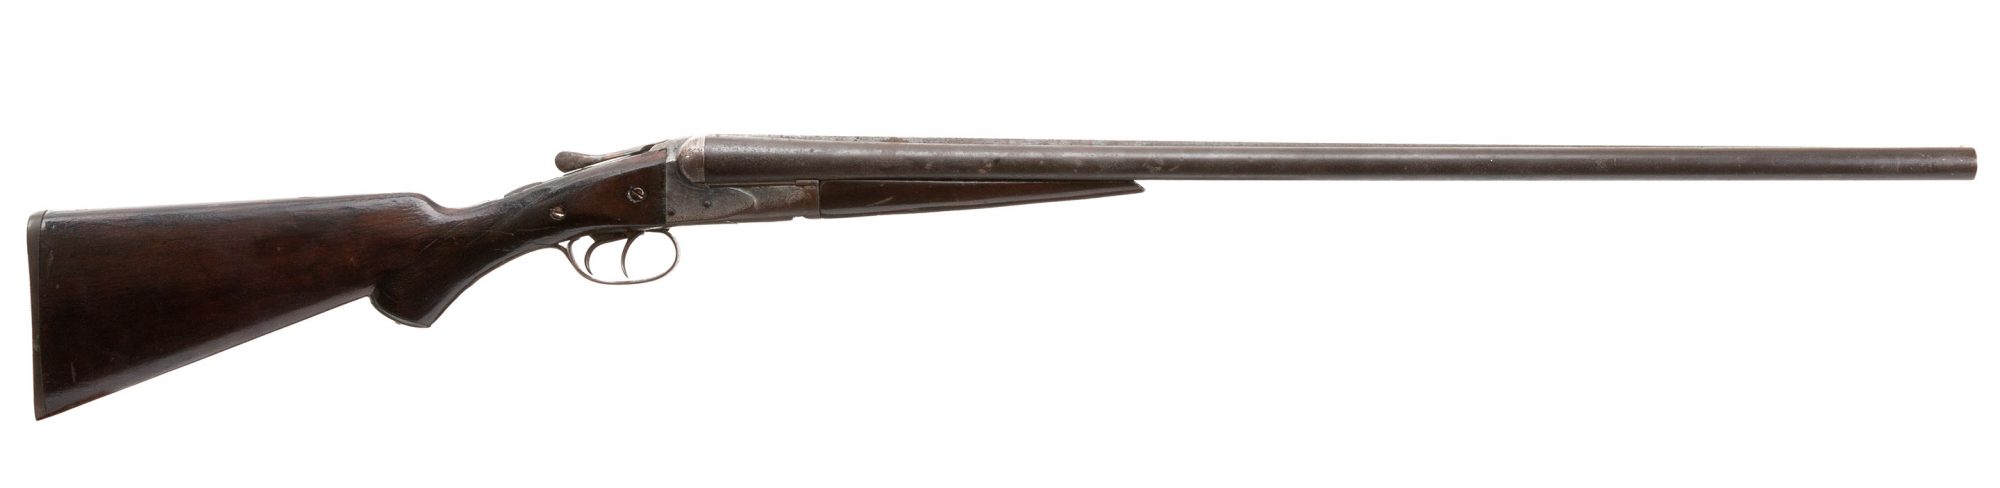 Fox Sterlingworth 12 Gauge Shotgun from 1932, before restoration work performed by Turnbull Restoration Co. of Bloomfield, NY